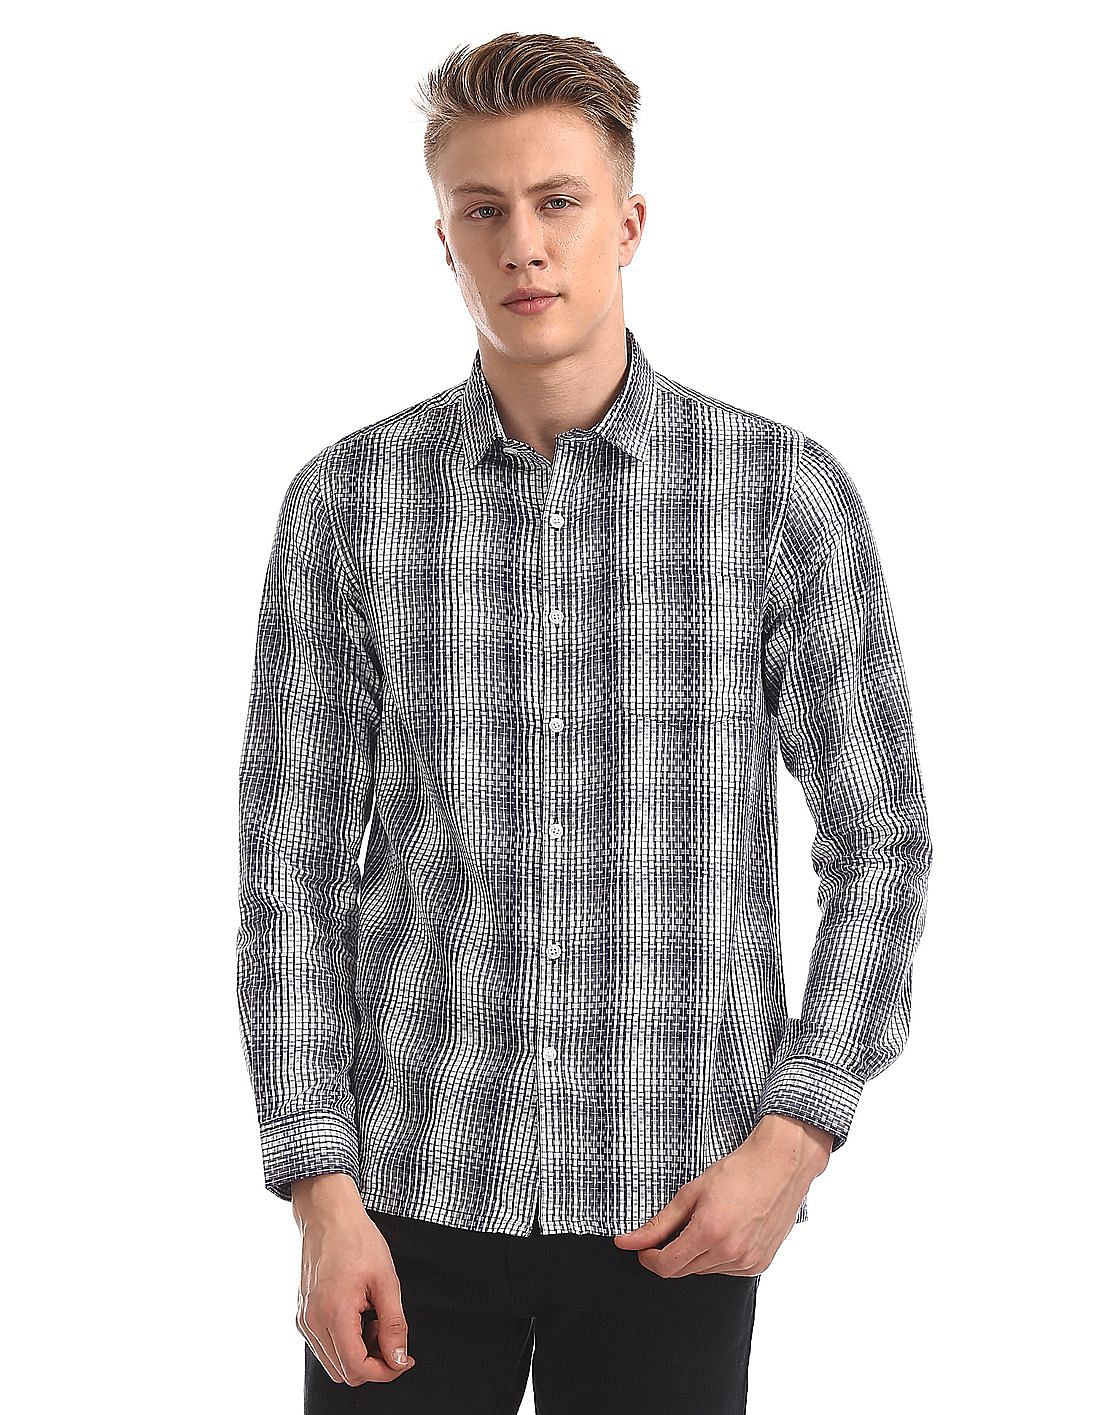 Buy Men Mitered Cuff Patterned Shirt online at NNNOW.com